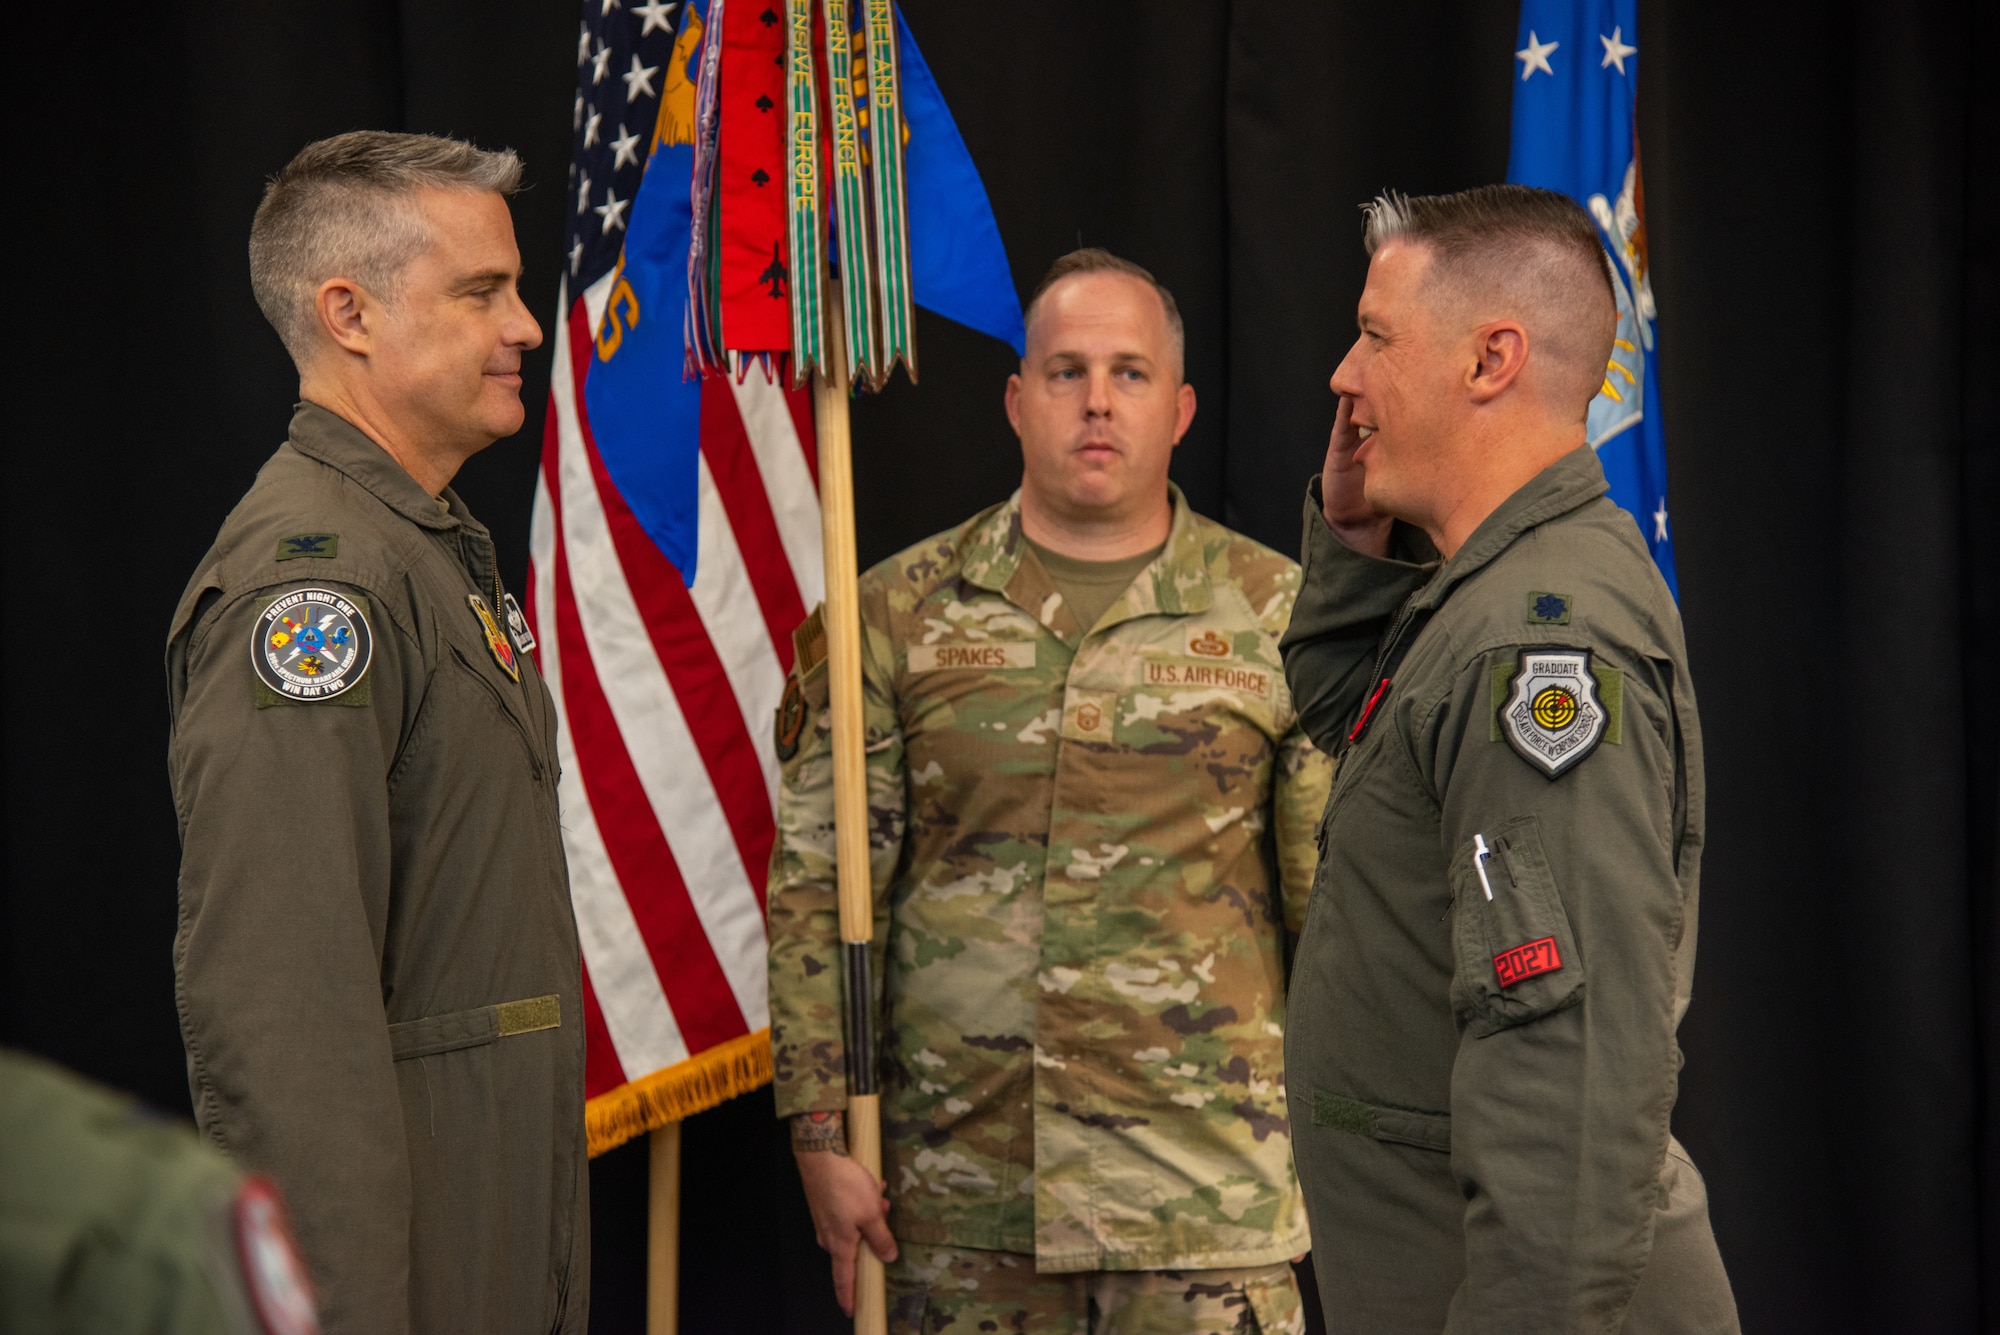 U.S. Air Force Col. Andrew J. Finkler, 850th Spectrum Warfare Group commander, left, is saluted by U.S. Air Force Lt. Col. Charles A. Friesz, 563rd Electronic Warfare Squadron commander, as he assumes command of 563rd EWS at the unit’s reactivation ceremony, San Antonio, Texas, April 25, 2024. The 563rd EWS lineage dates back to WWII, and includes the “Wild Weasel” mission established during the Vietnam War. The squadron now aims to become a digitally-native organization based in 21st-century processes, practices and technologies to execute electromagnetic spectrum operations support for the Air Force. (U.S. Air Force photo by Jarrod M. Vickers)